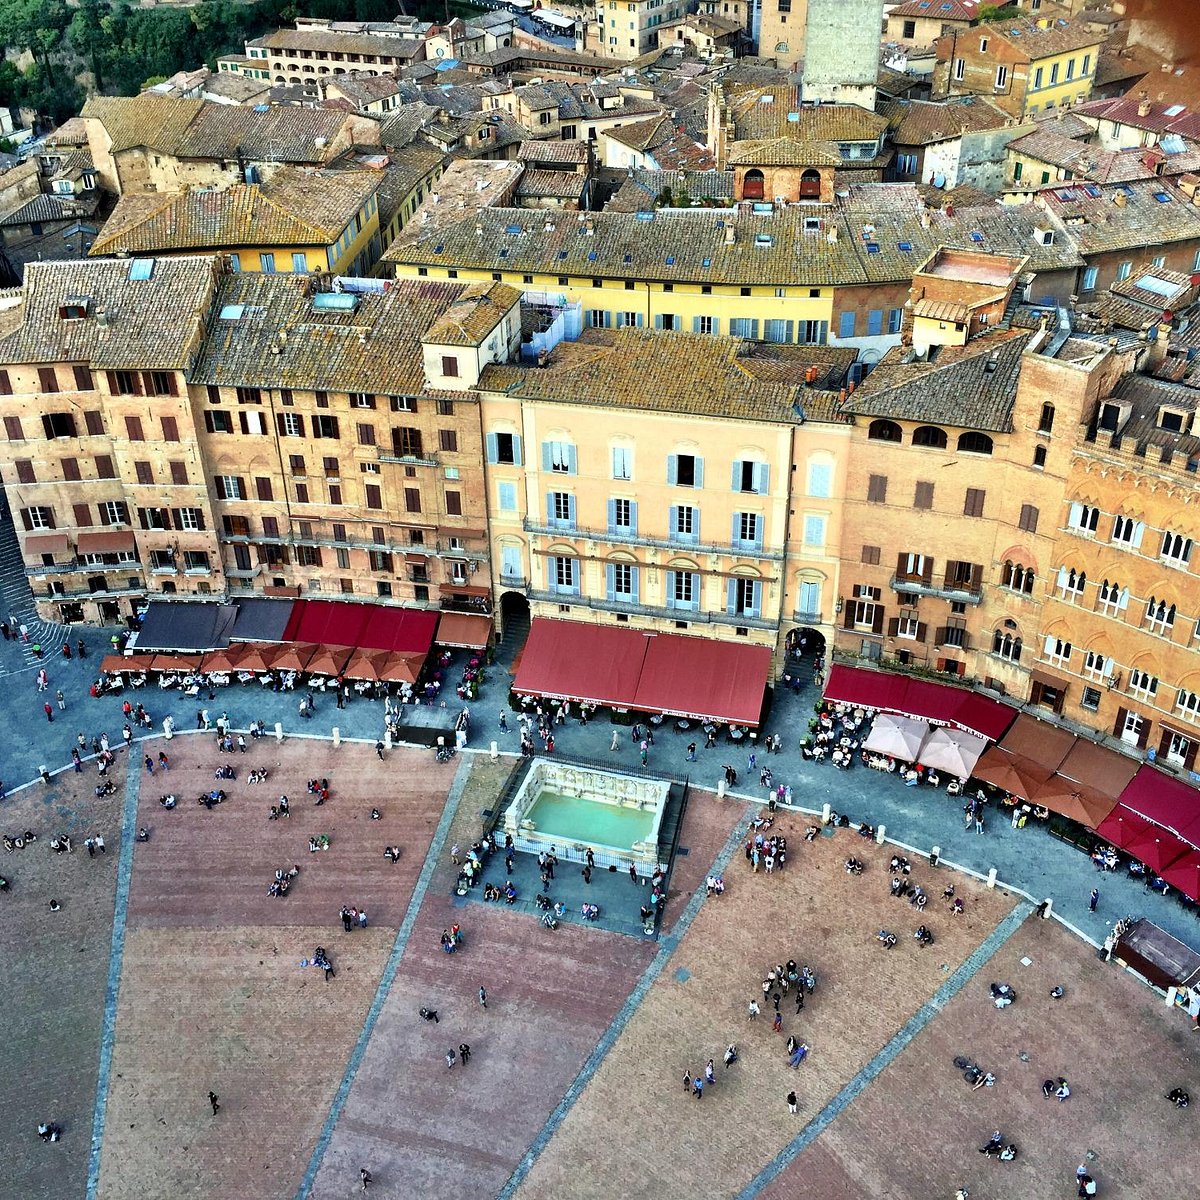 Piazza del Campo (Siena) - All You Need to Know BEFORE You Go